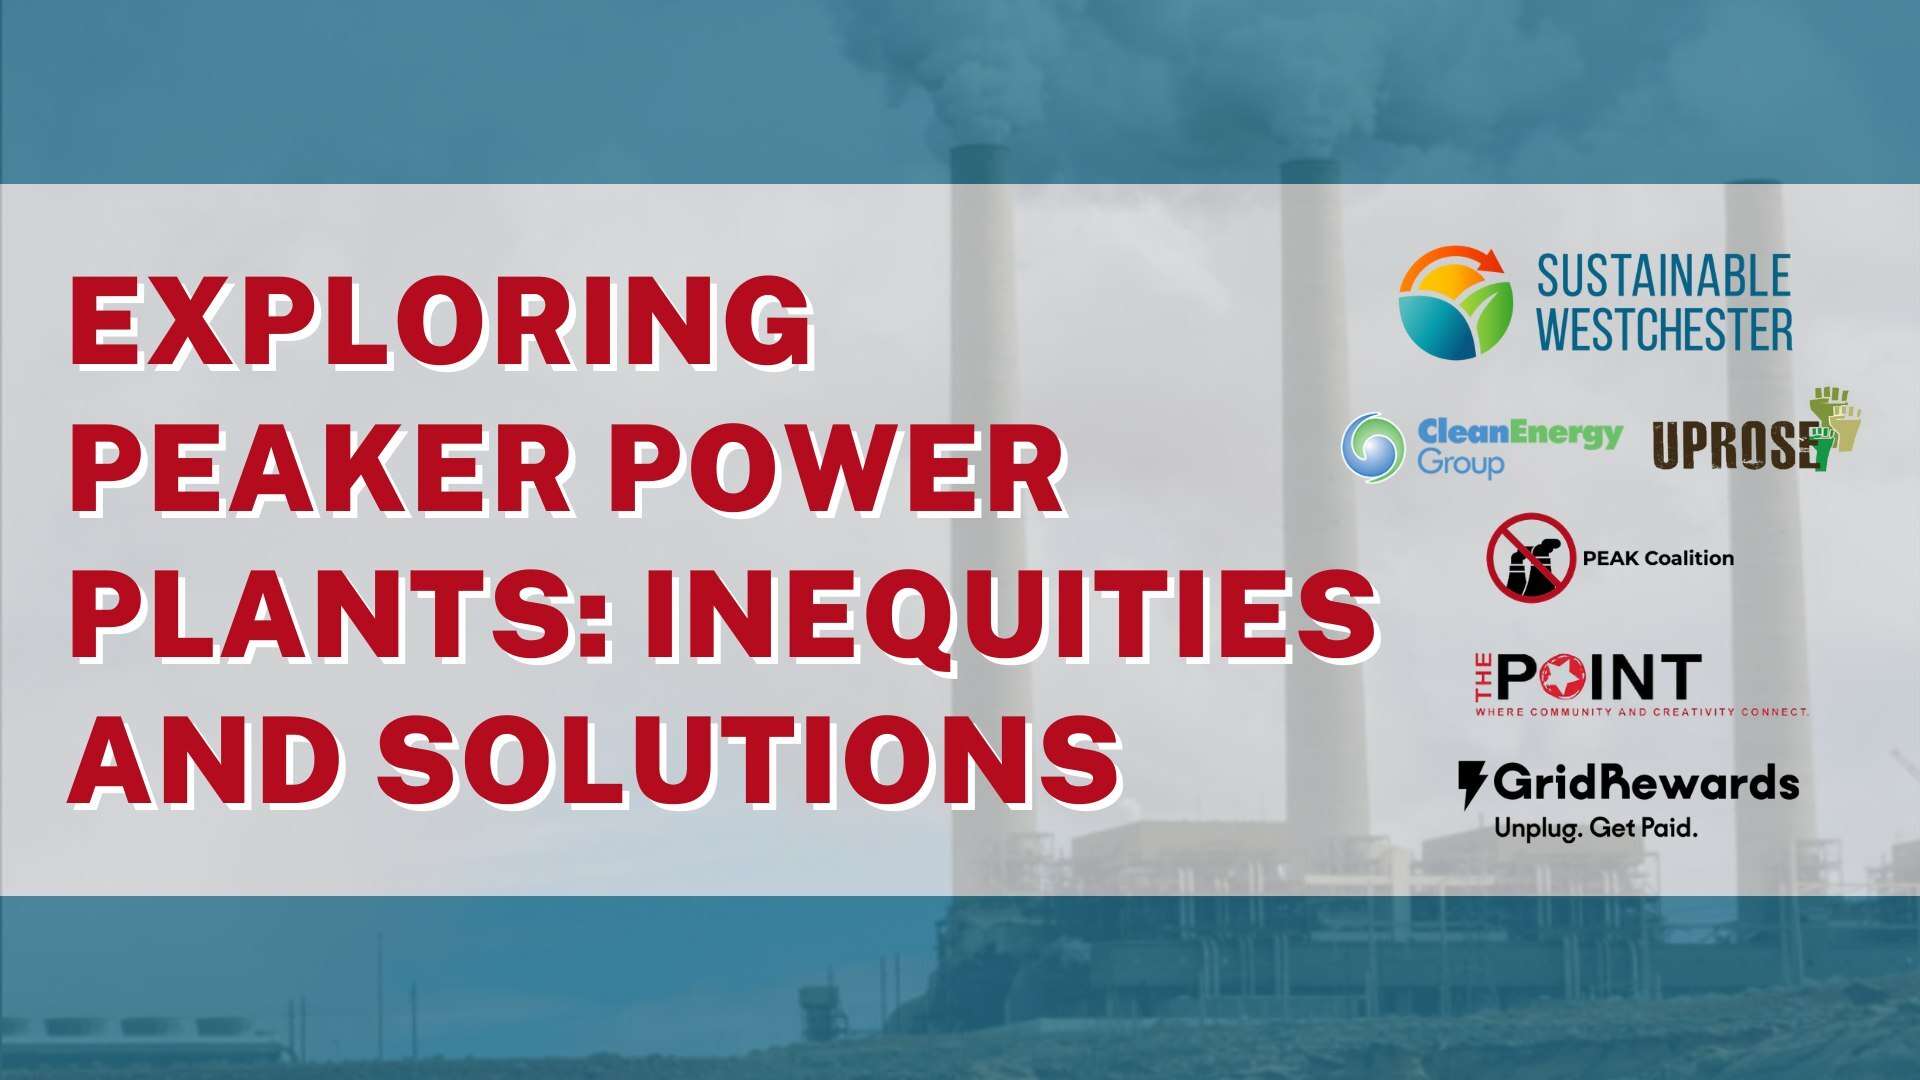 Exploring Peaker Power Plant Inequities and Solutions – Thursday, November 10th, 7:00-8:00pm